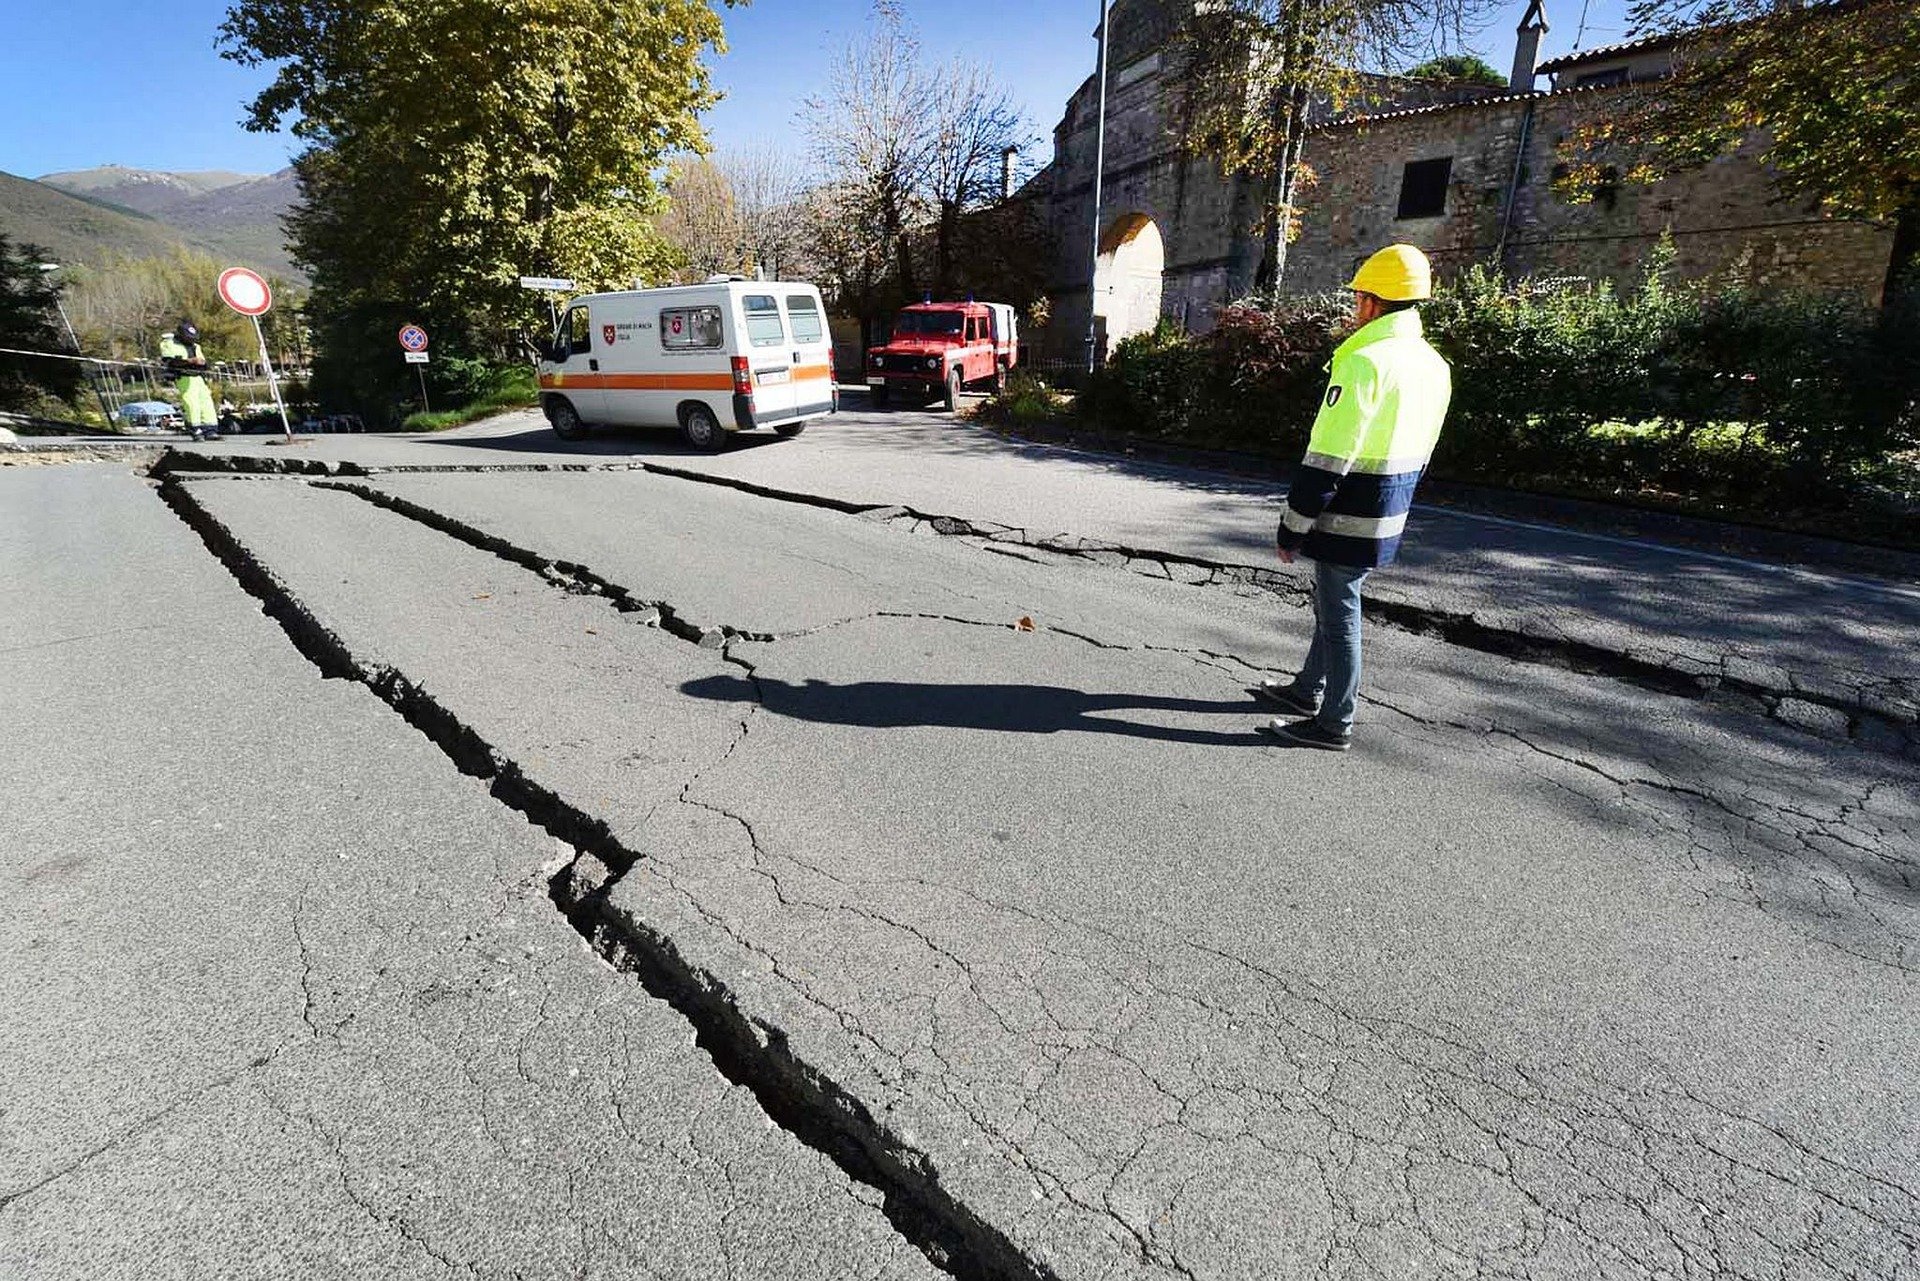 Unlike regular earthquakes, which can cause visible damage, slow earthquakes cannot be felt at the Earth's surface. Image credit - Pixabay/ marcellomigliosi1956, licensed under pixabay license